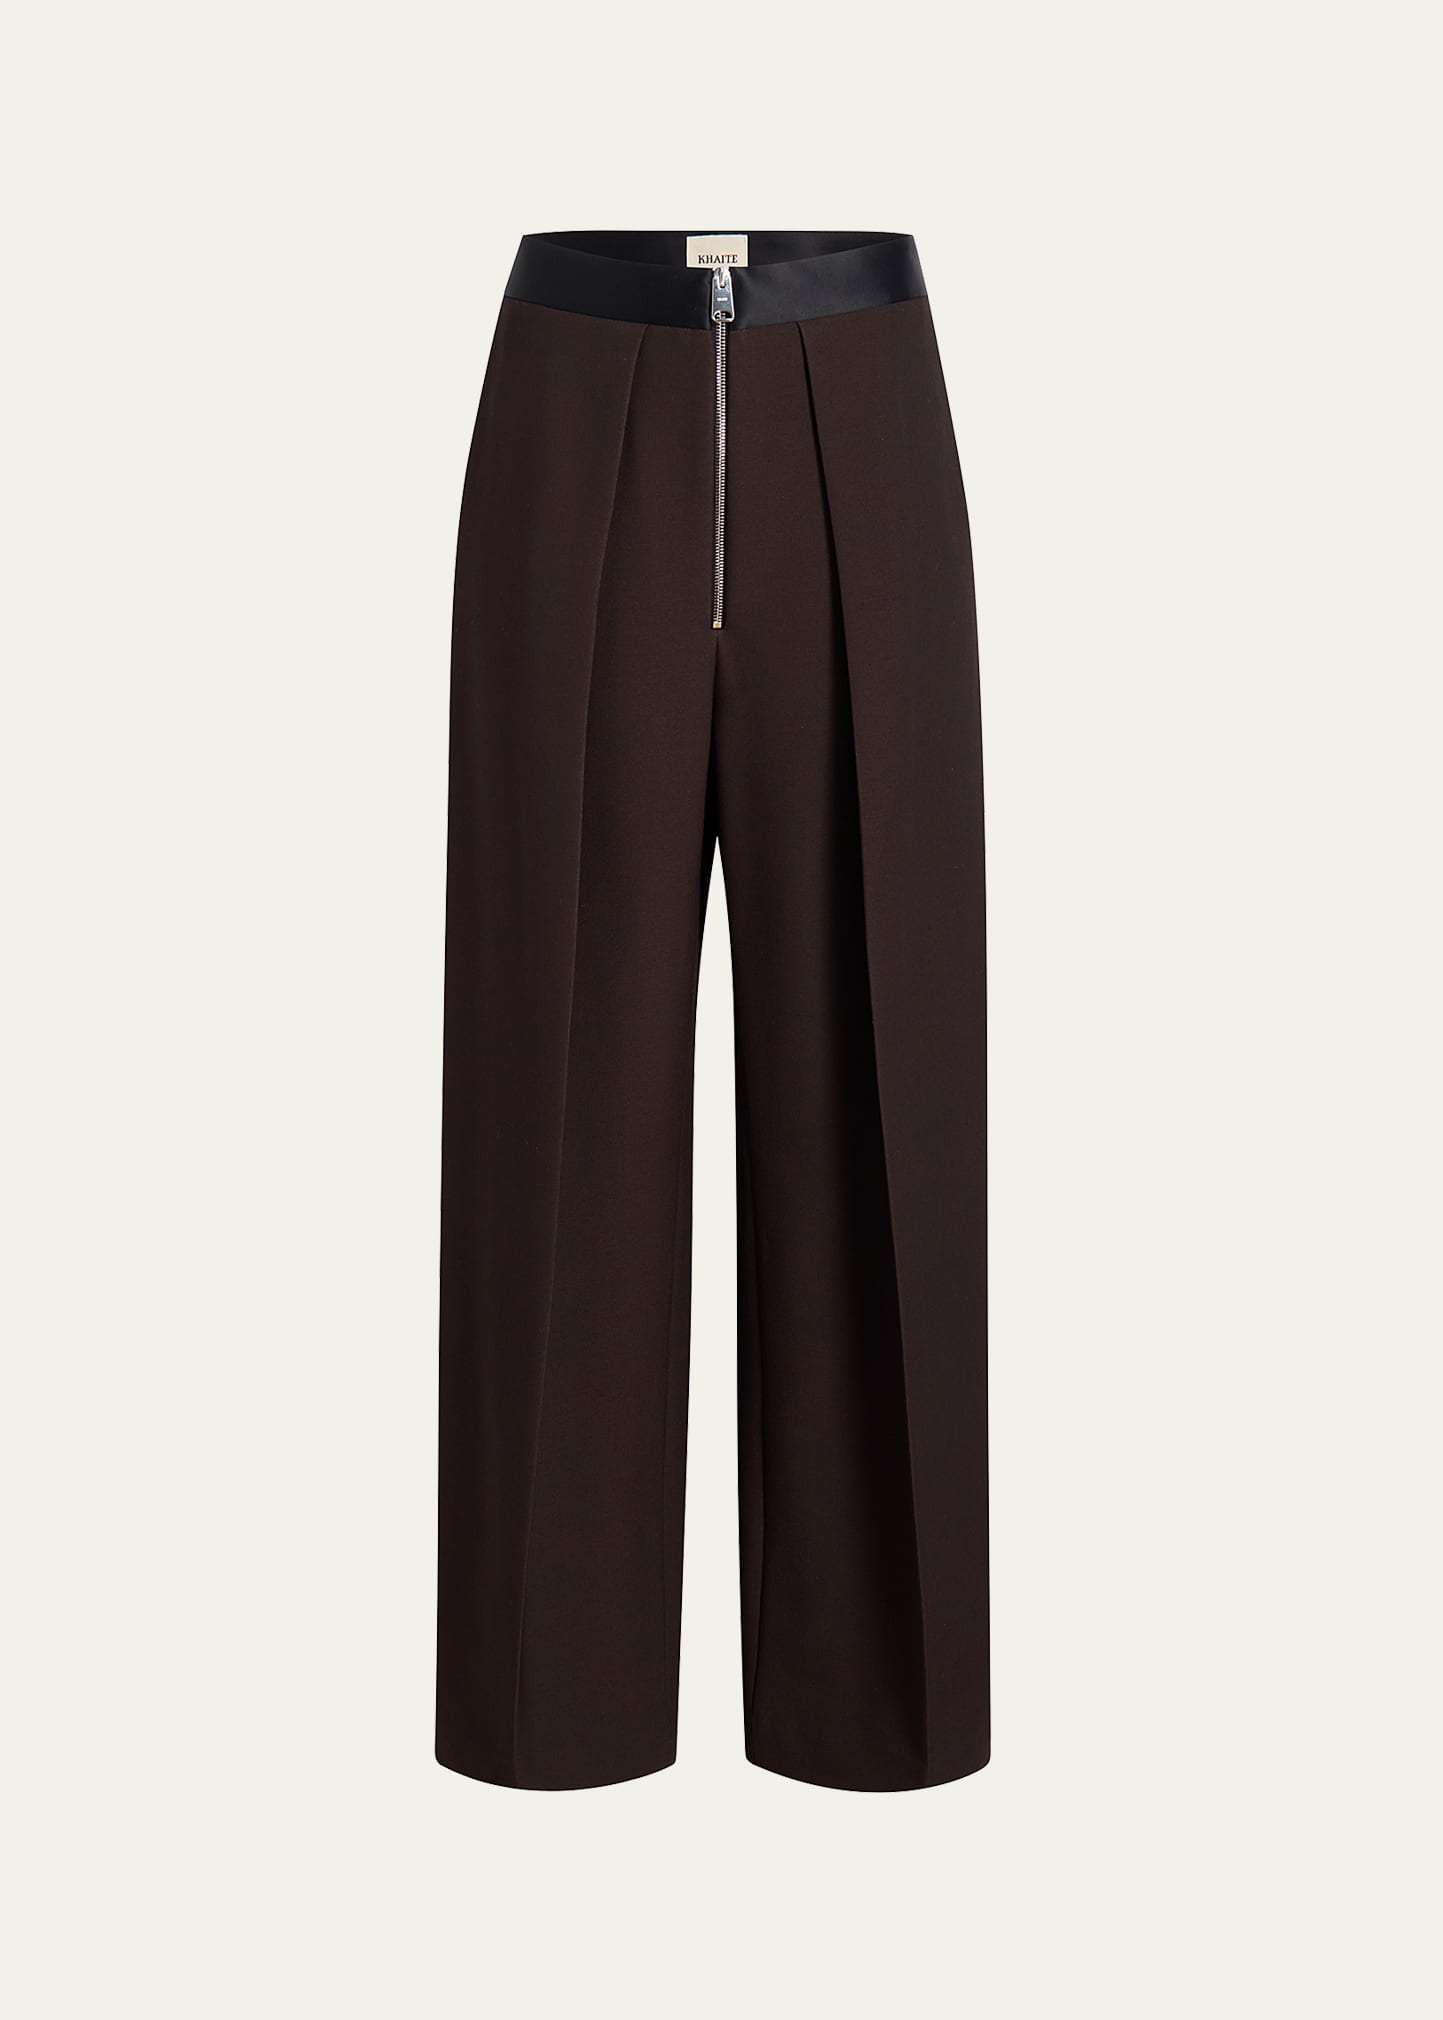 Khaite Marine Pleated Wide-leg Pants With Zipper Front In Brown